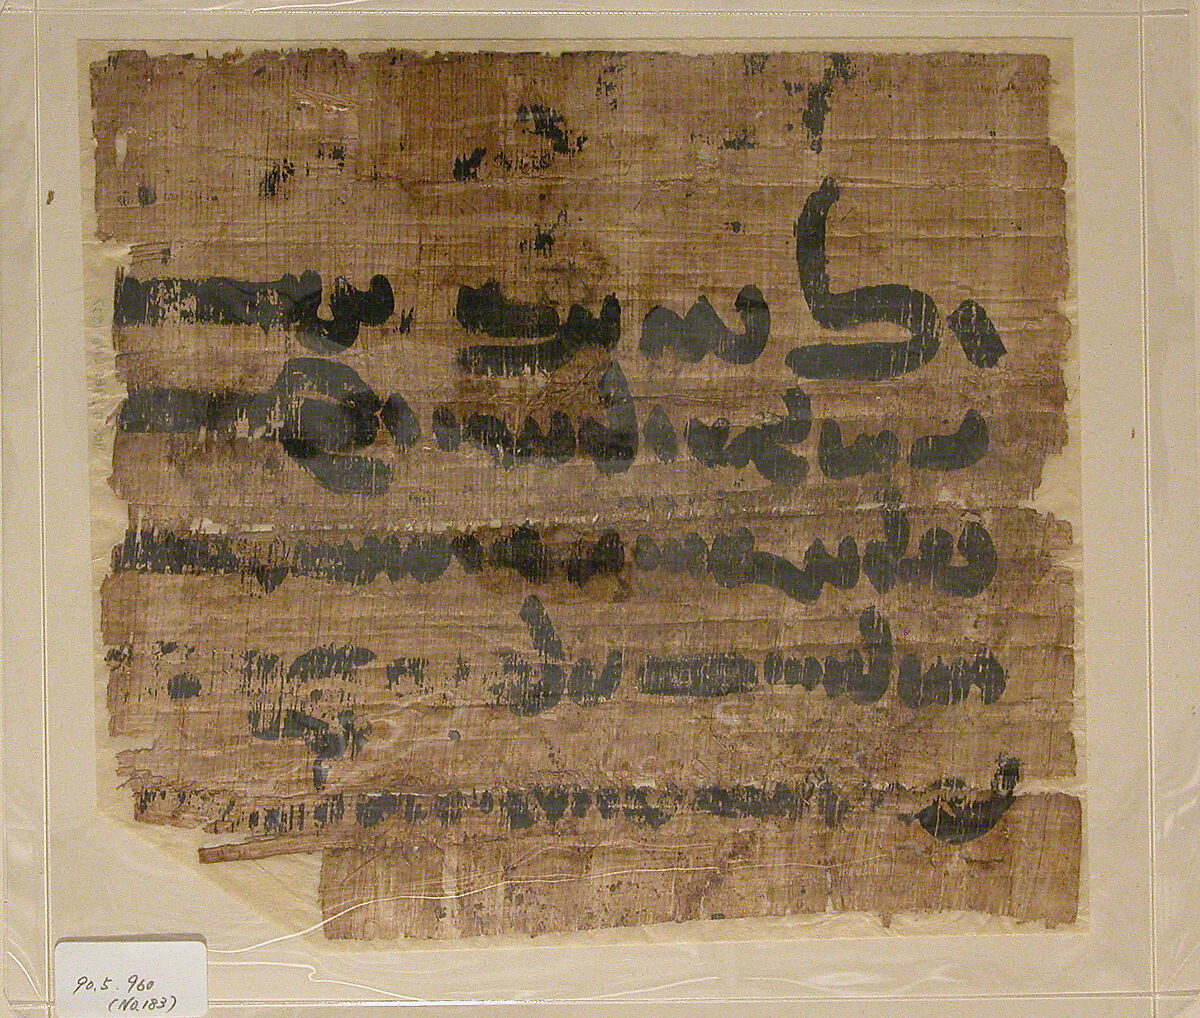 Letter in Pahlavi script, Ink on papyrus 